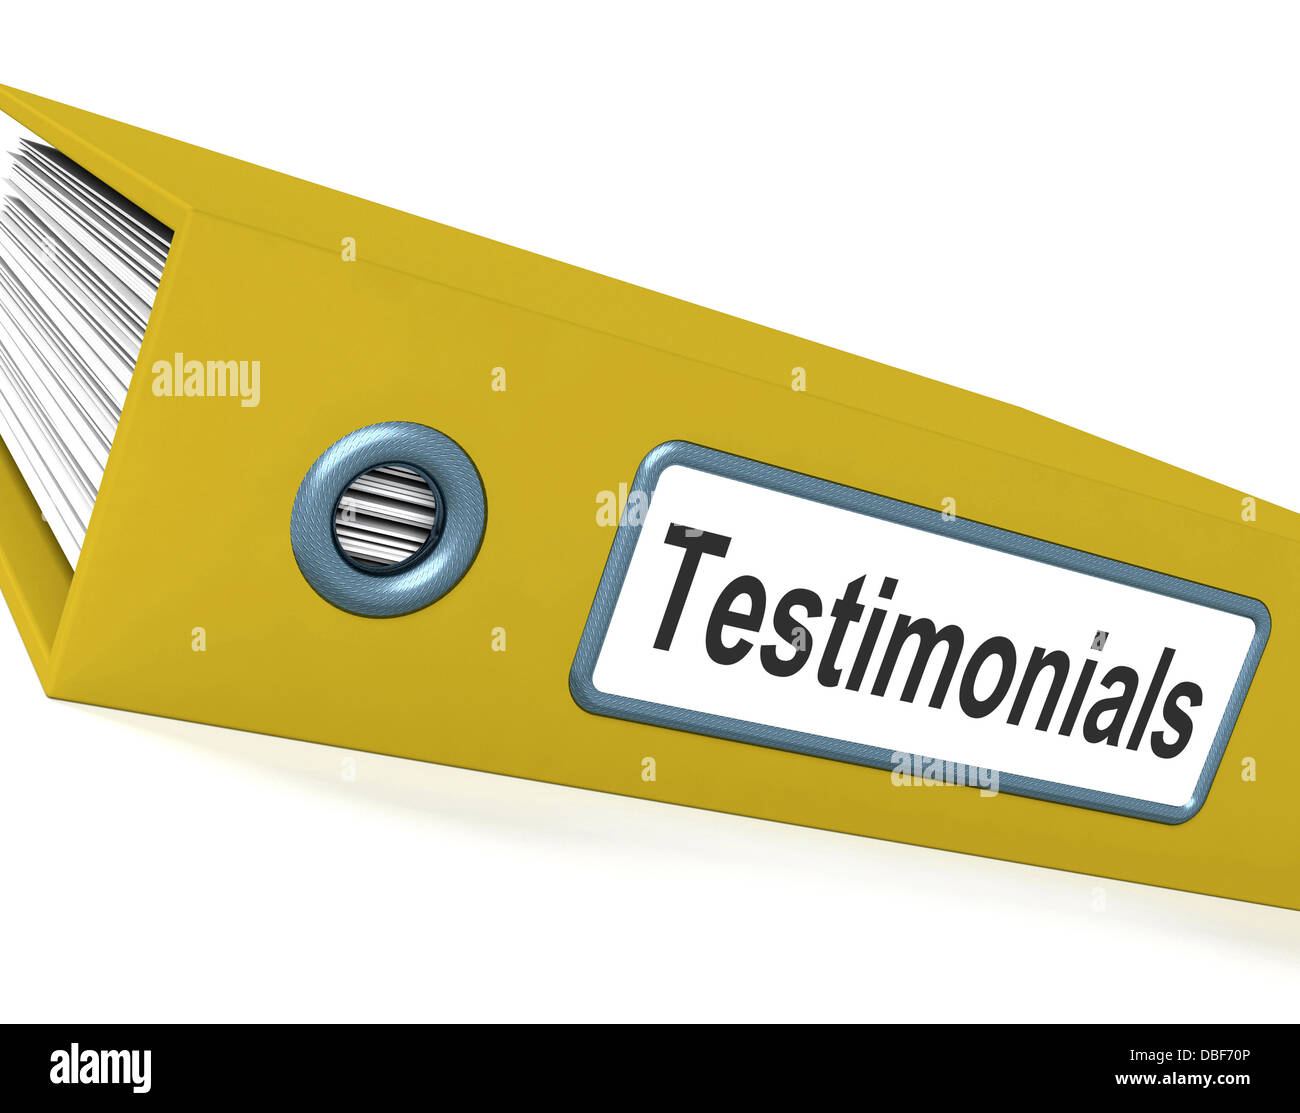 Testimonials File Showing Recommendations And Tributes Stock Photo